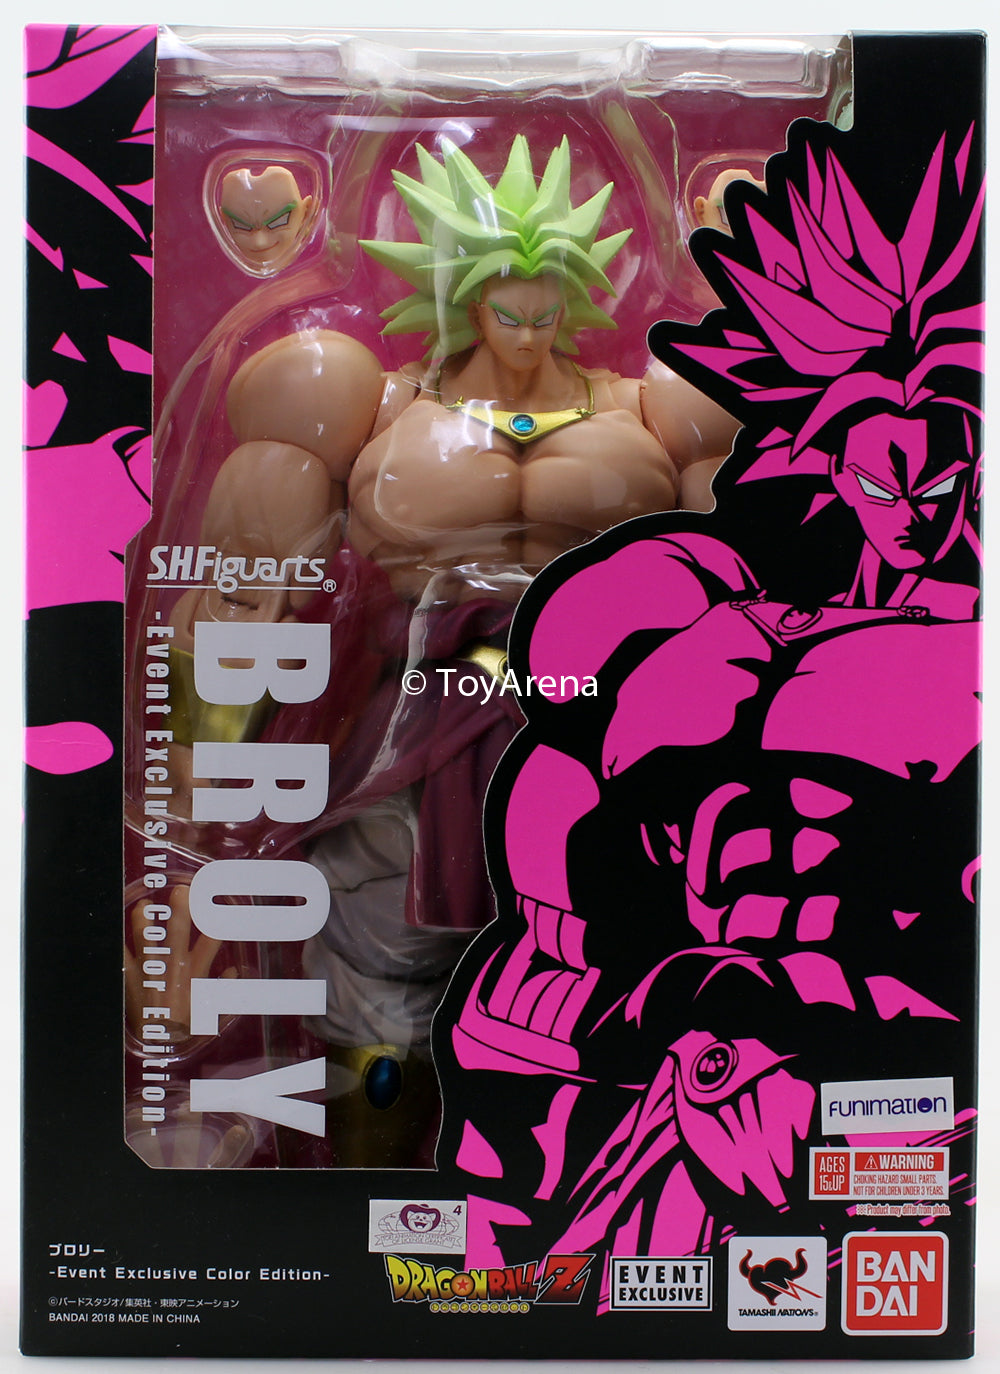 S.H. Figuarts Dragon Ball Z Broly Event Exclusive Color Edition Action Figure SDCC 2018